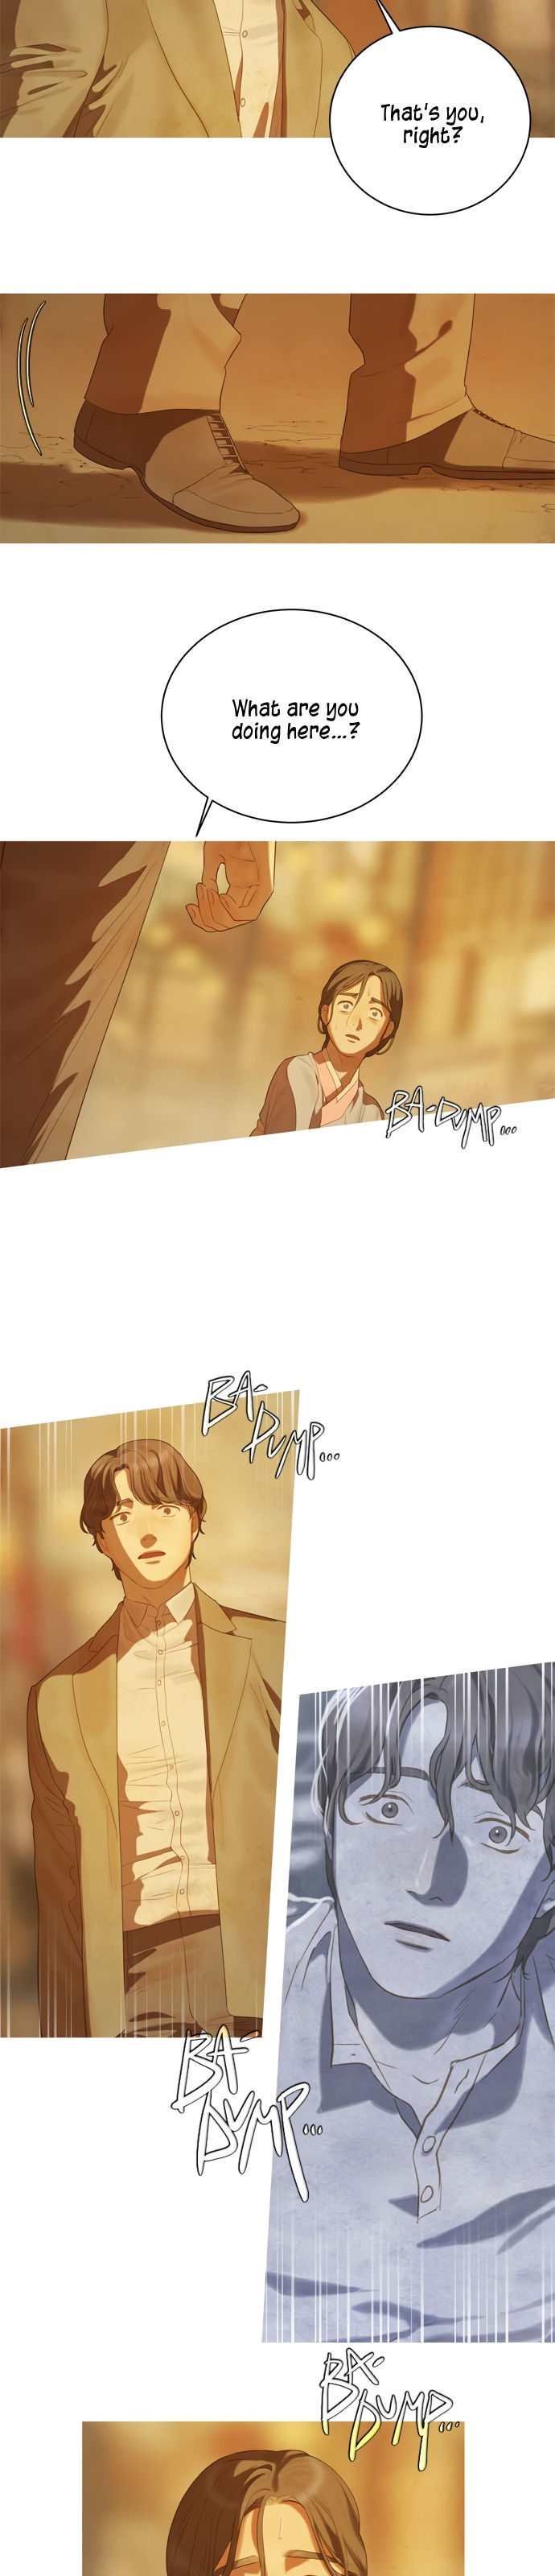 Gorae Byul - The Gyeongseong Mermaid - Chapter 18 Page 4